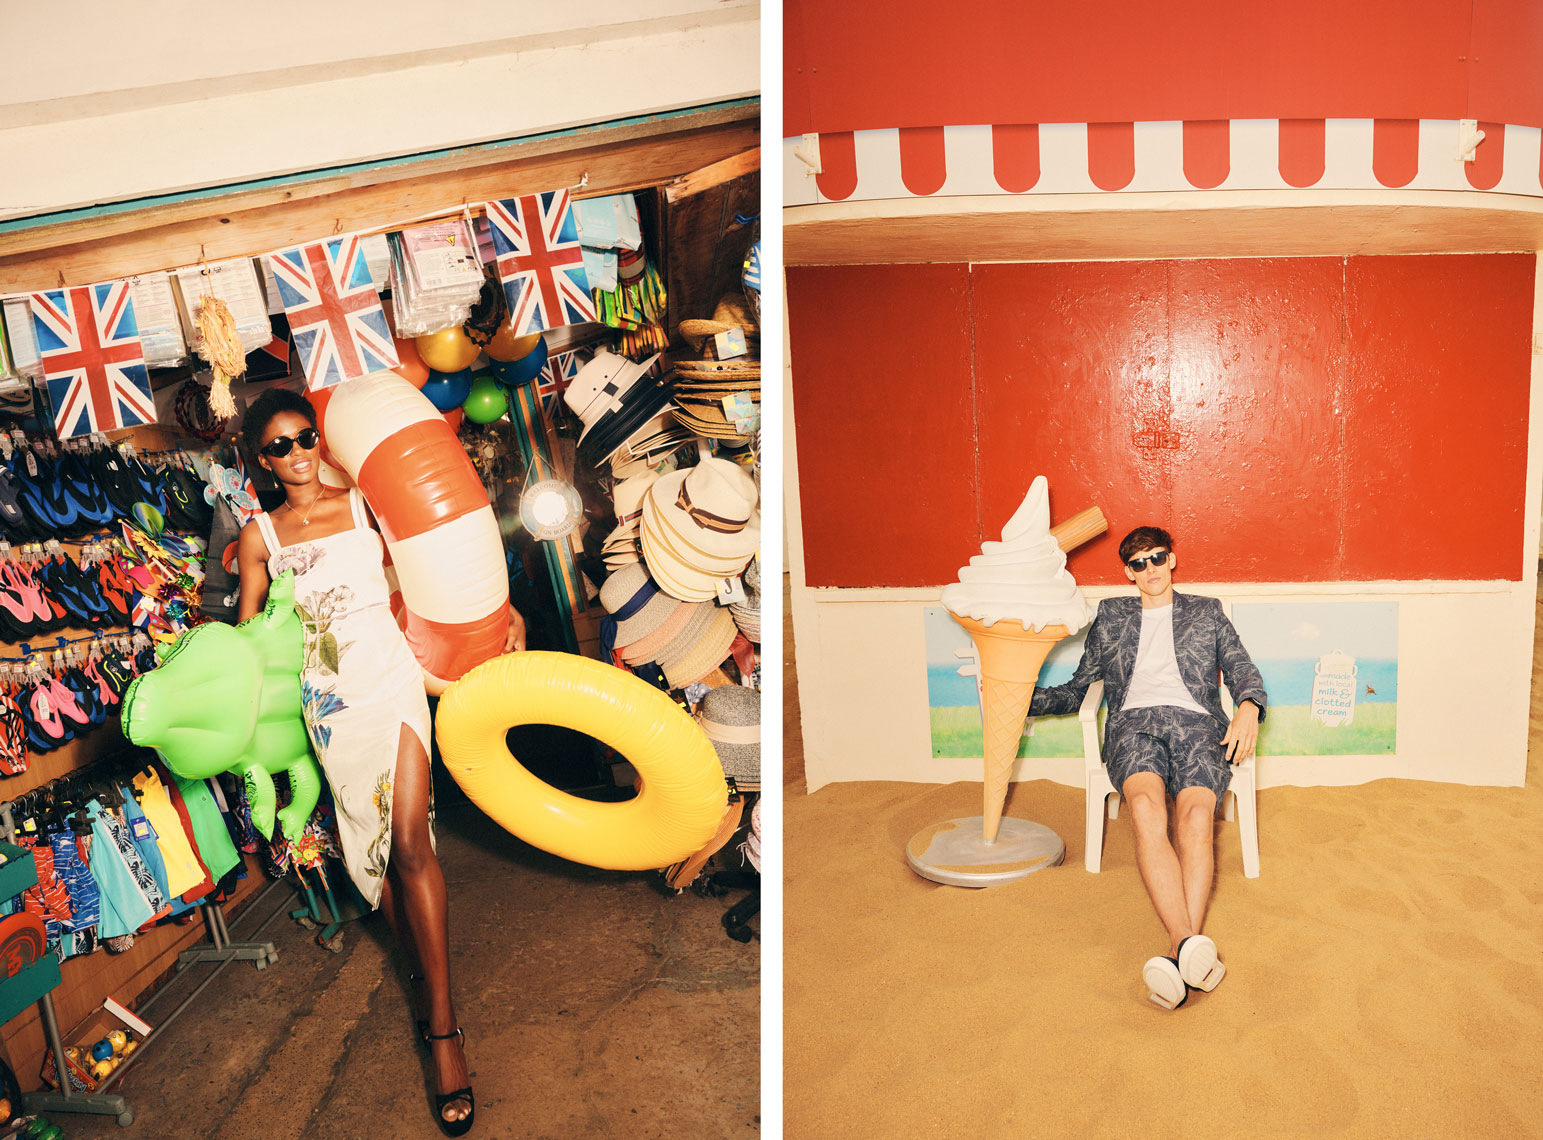 issie-gibbons-fashion-stylist-ted-baker-high-summer-campaign-british-seaside-inflatables-giant-ice-cream-beach